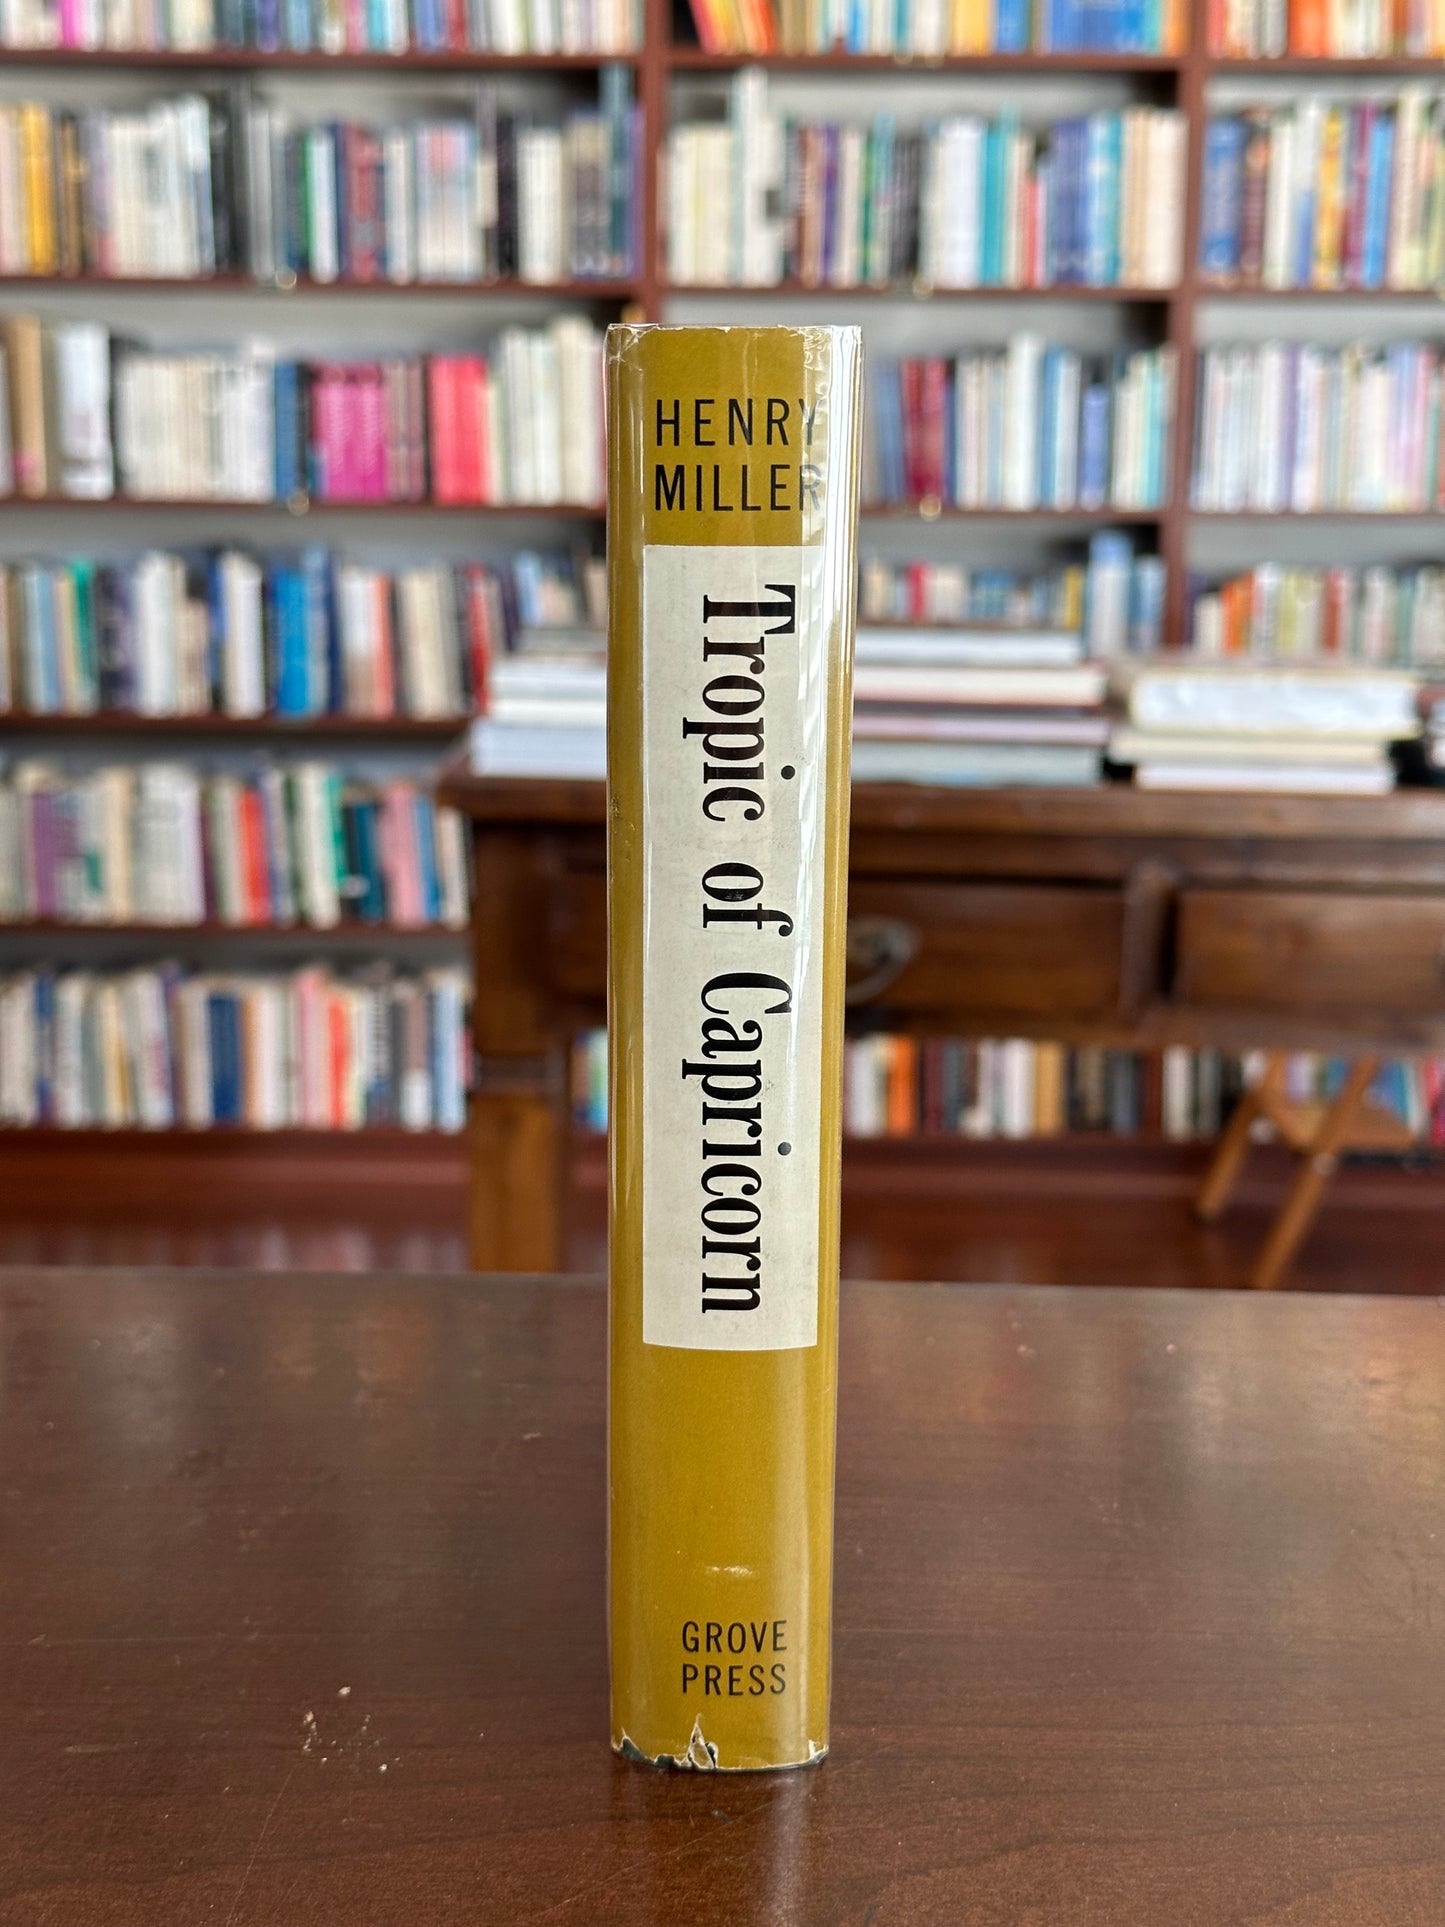 Tropic of Capricorn by Henry Miller (First Edition)